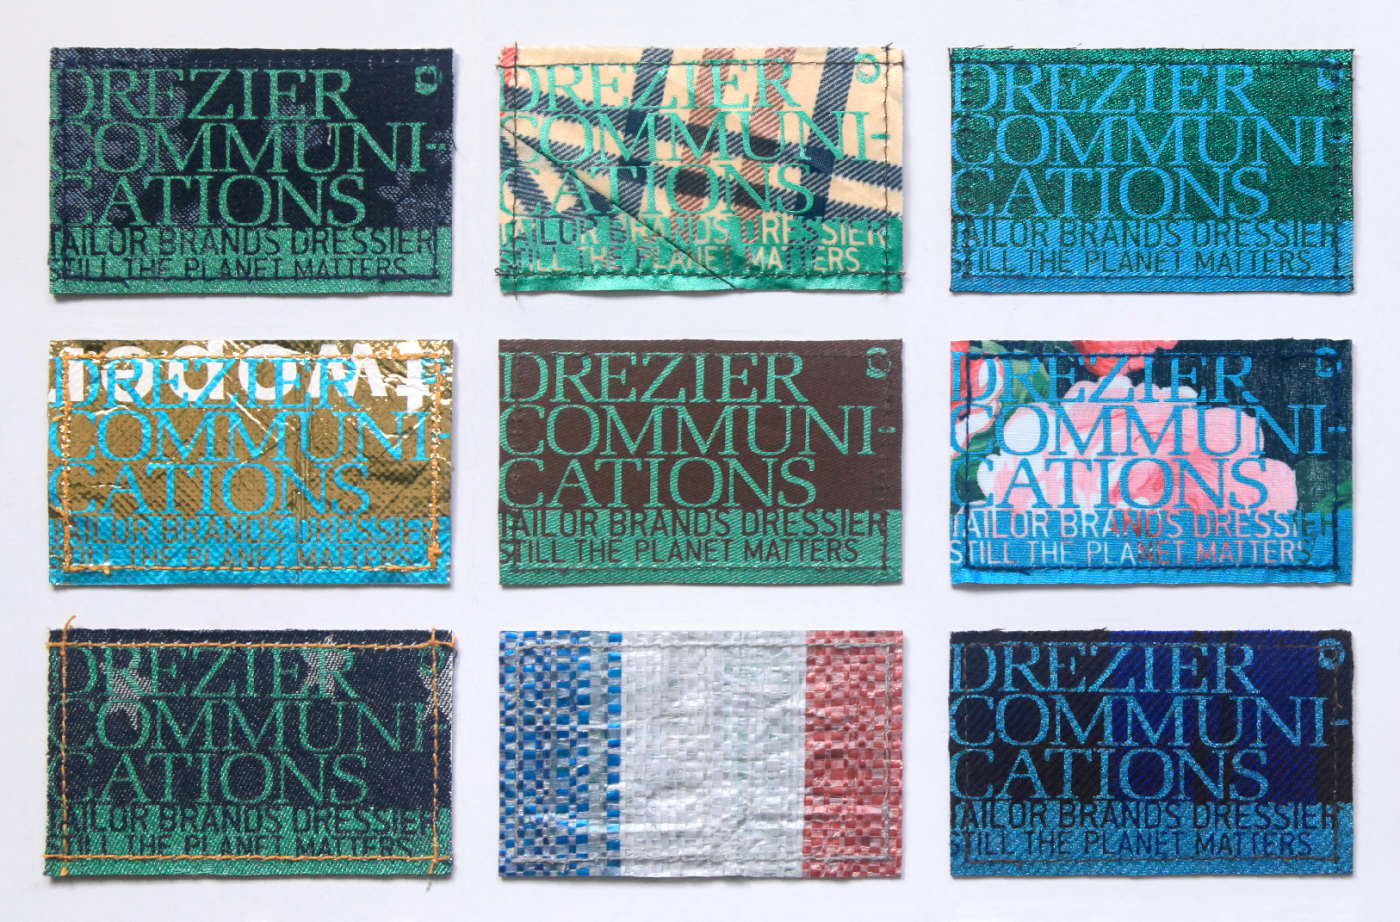 Business Cards | Dezier Communications wins Muse Creative Awards 